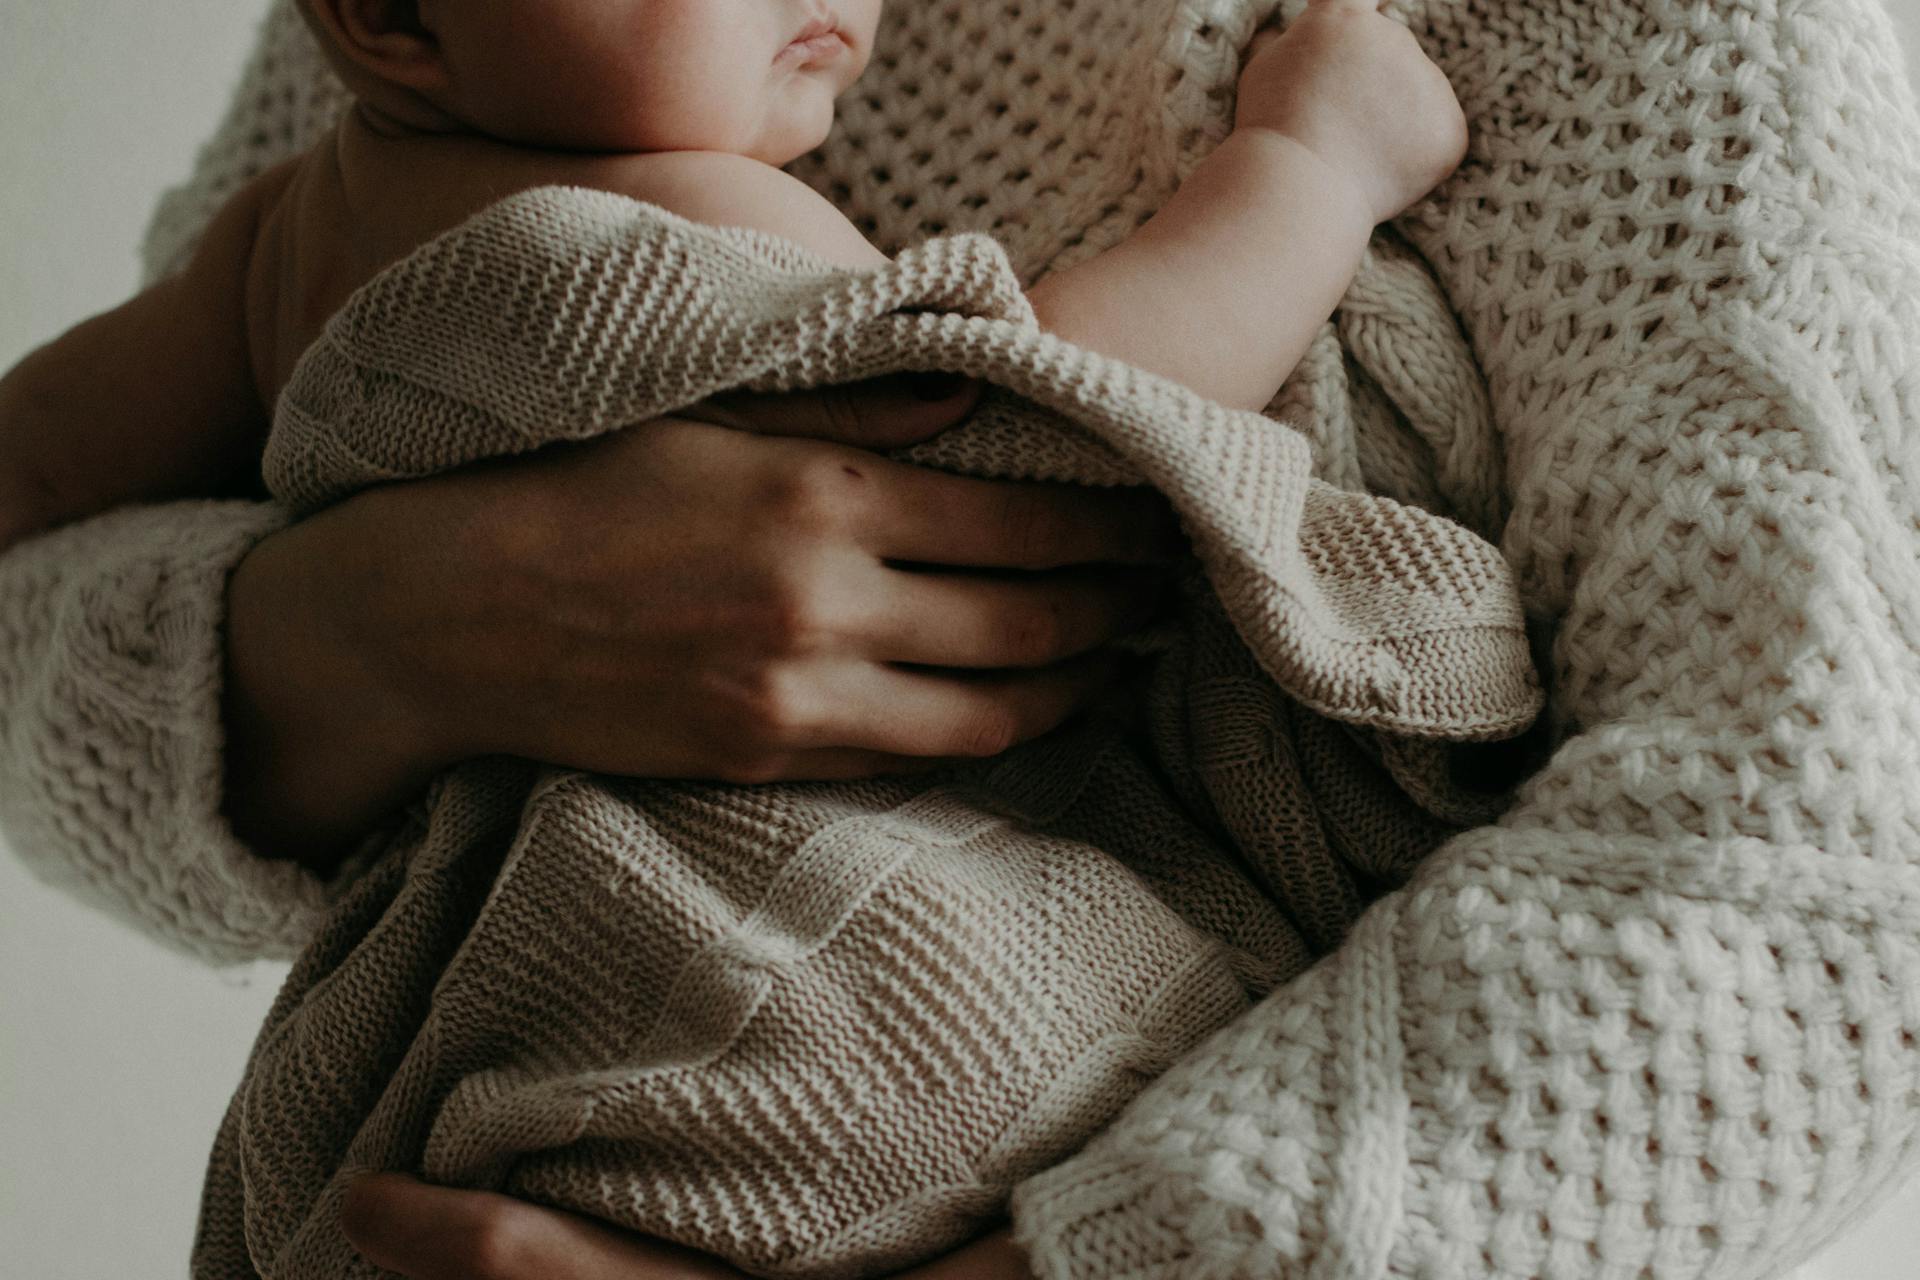 A woman holding a baby | Source: Pexels